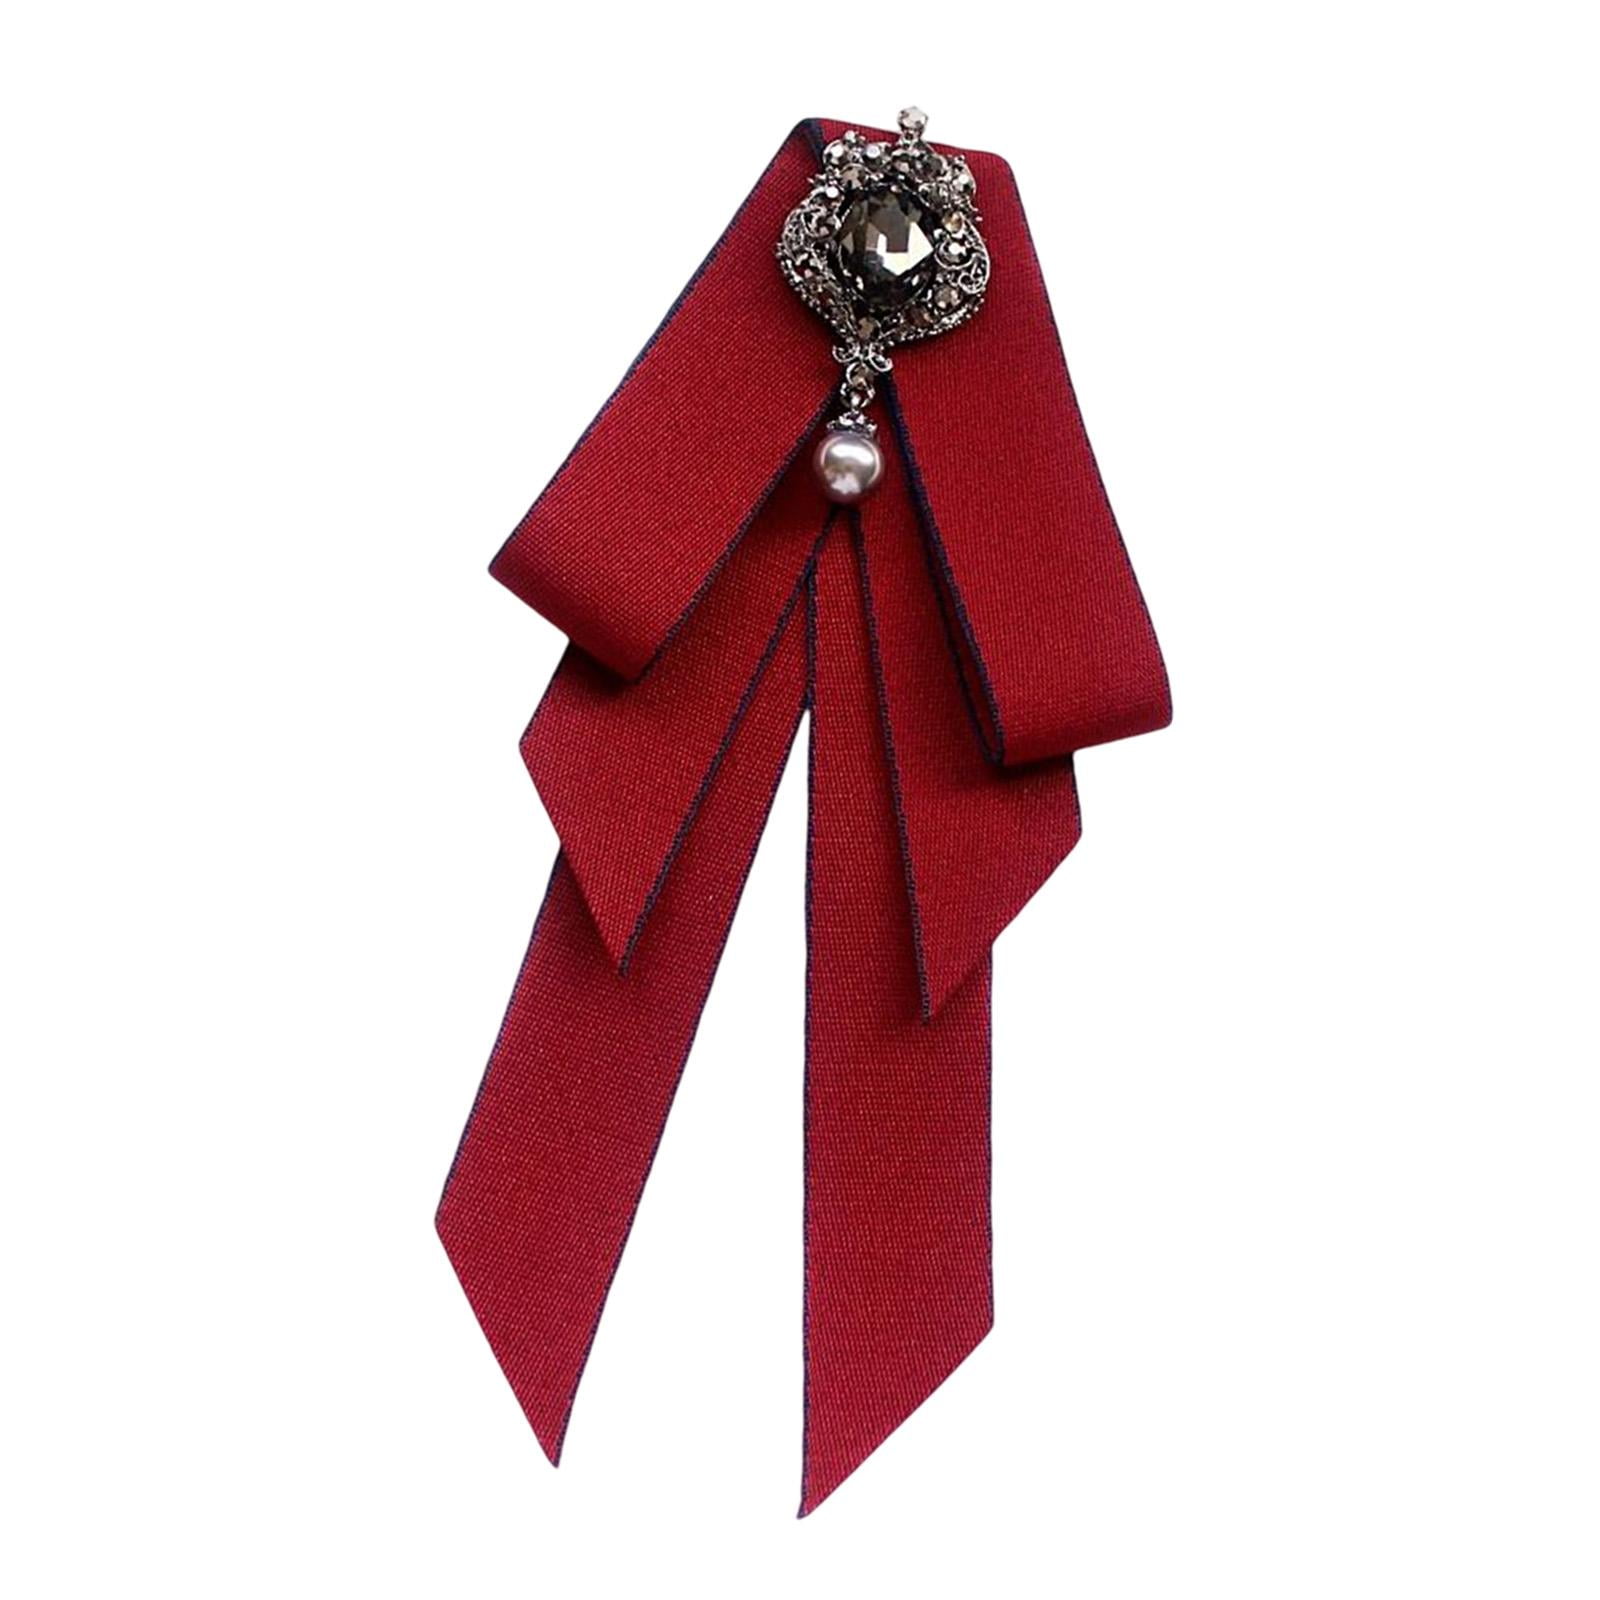 Bow Tie for Women Brooch Pin Rhinestone Girls Elegant Ribbon Fashion Collar  Jewelry Bowknot Necktie Bowties for Gift Suit Graduation Red 